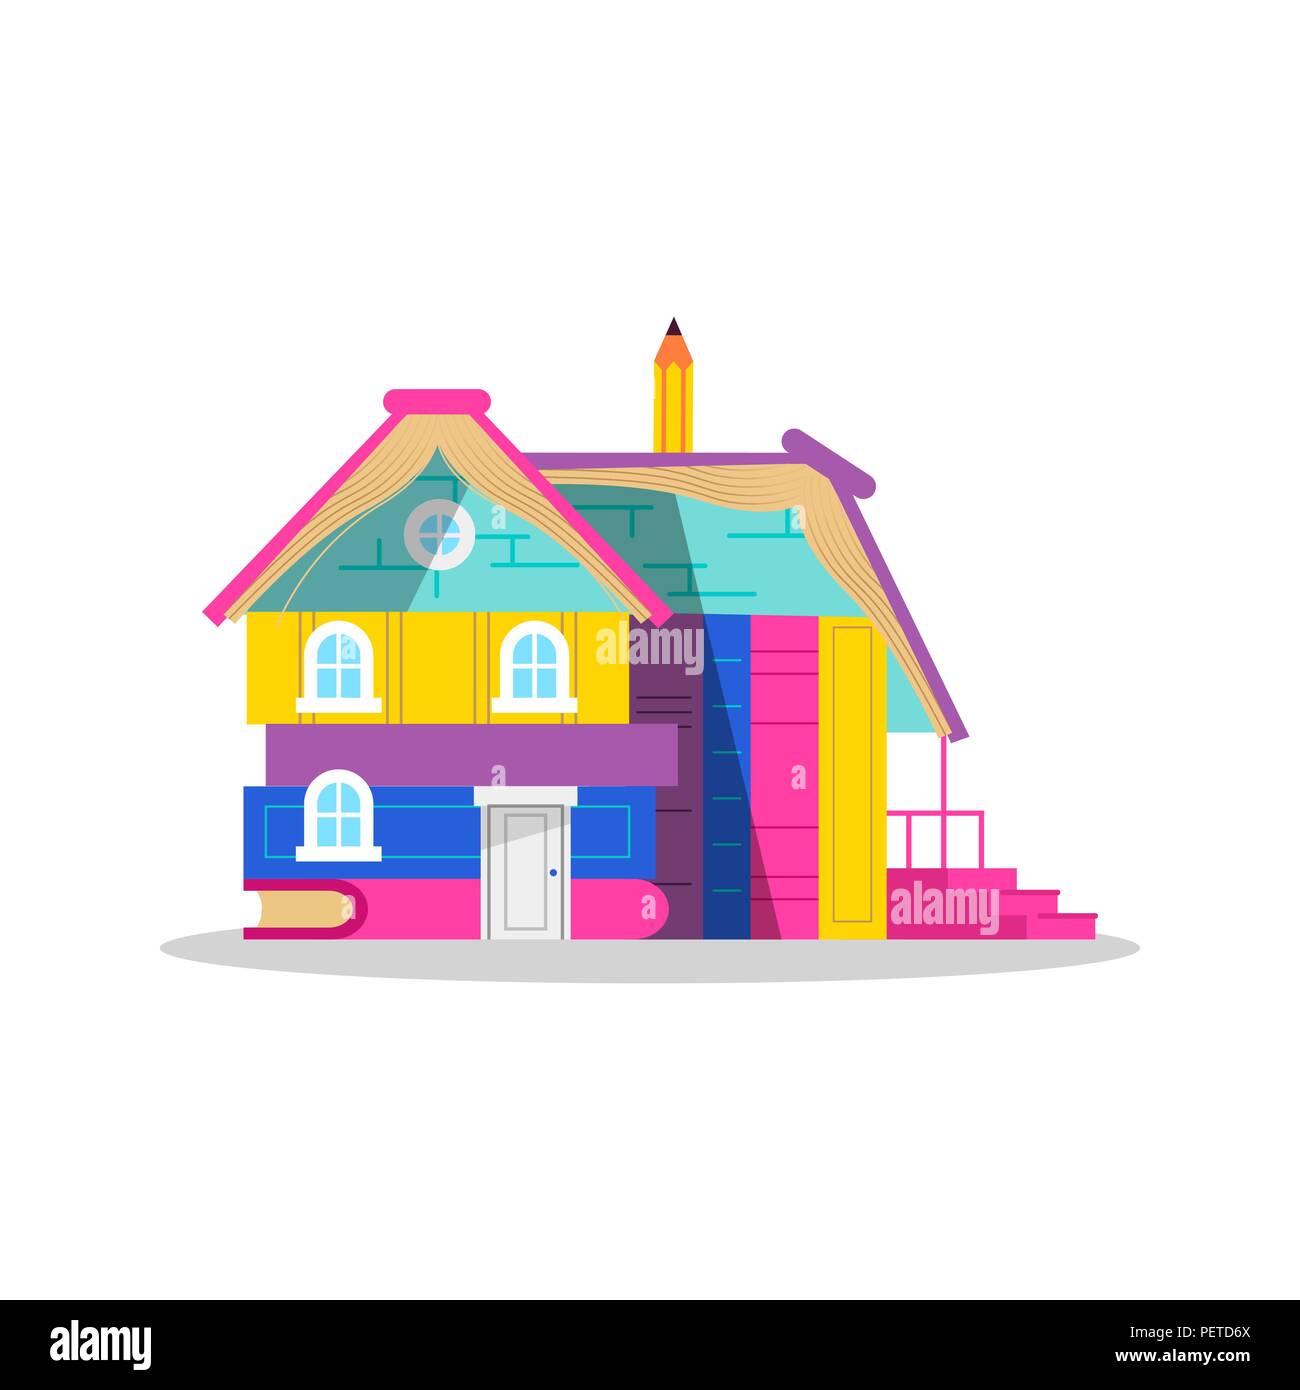 Big house made of colorful children books on isolated white background, concept illustration for kids imagination or school education. EPS10 vector. Stock Vector